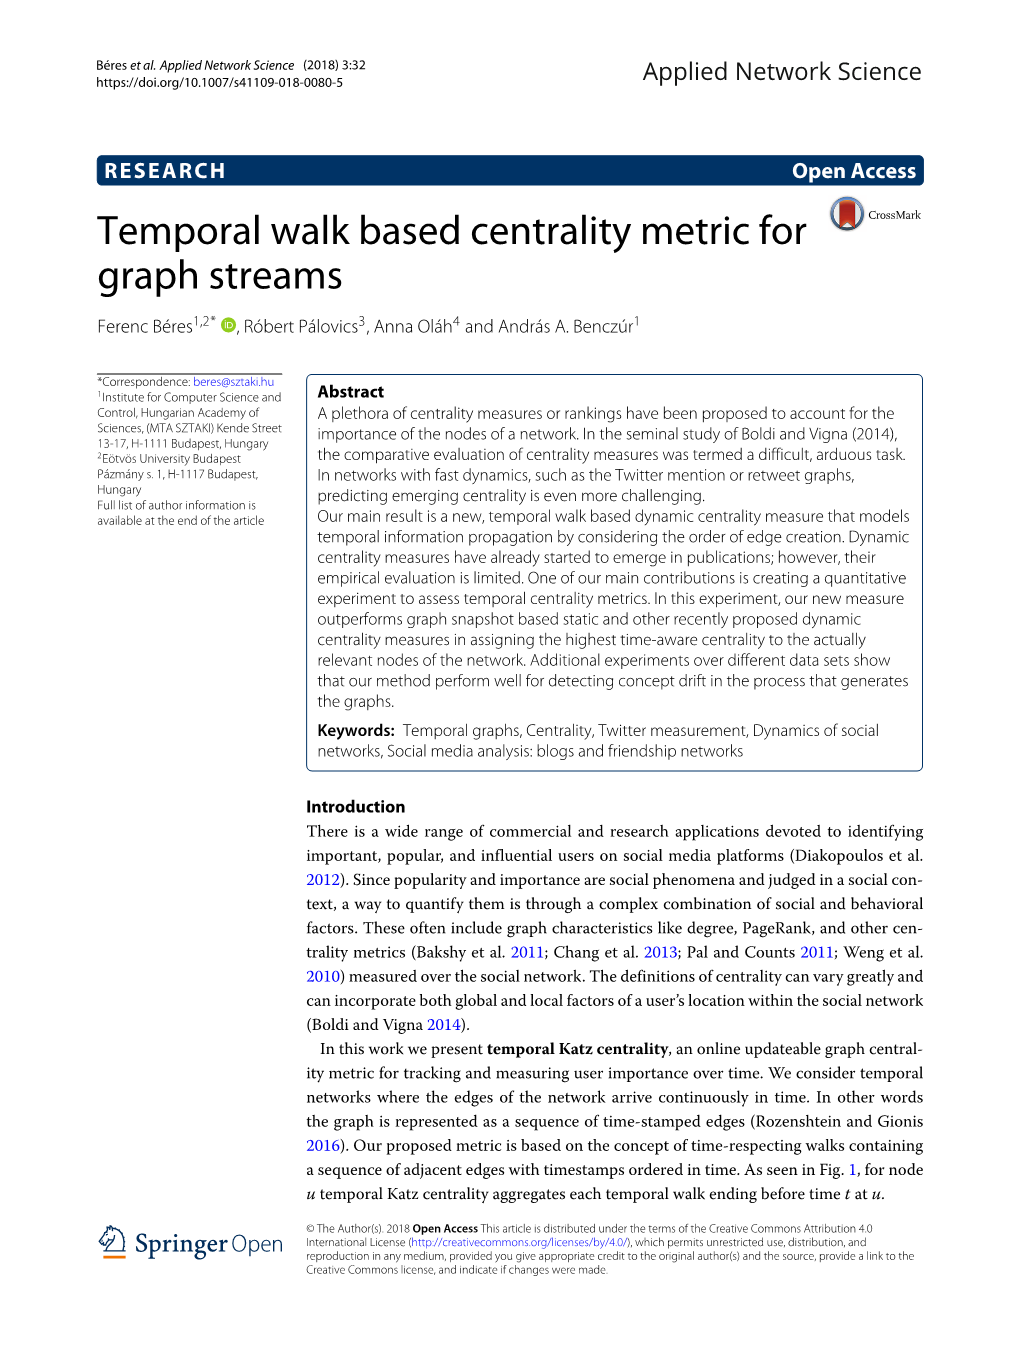 Temporal Walk Based Centrality Metric for Graph Streams